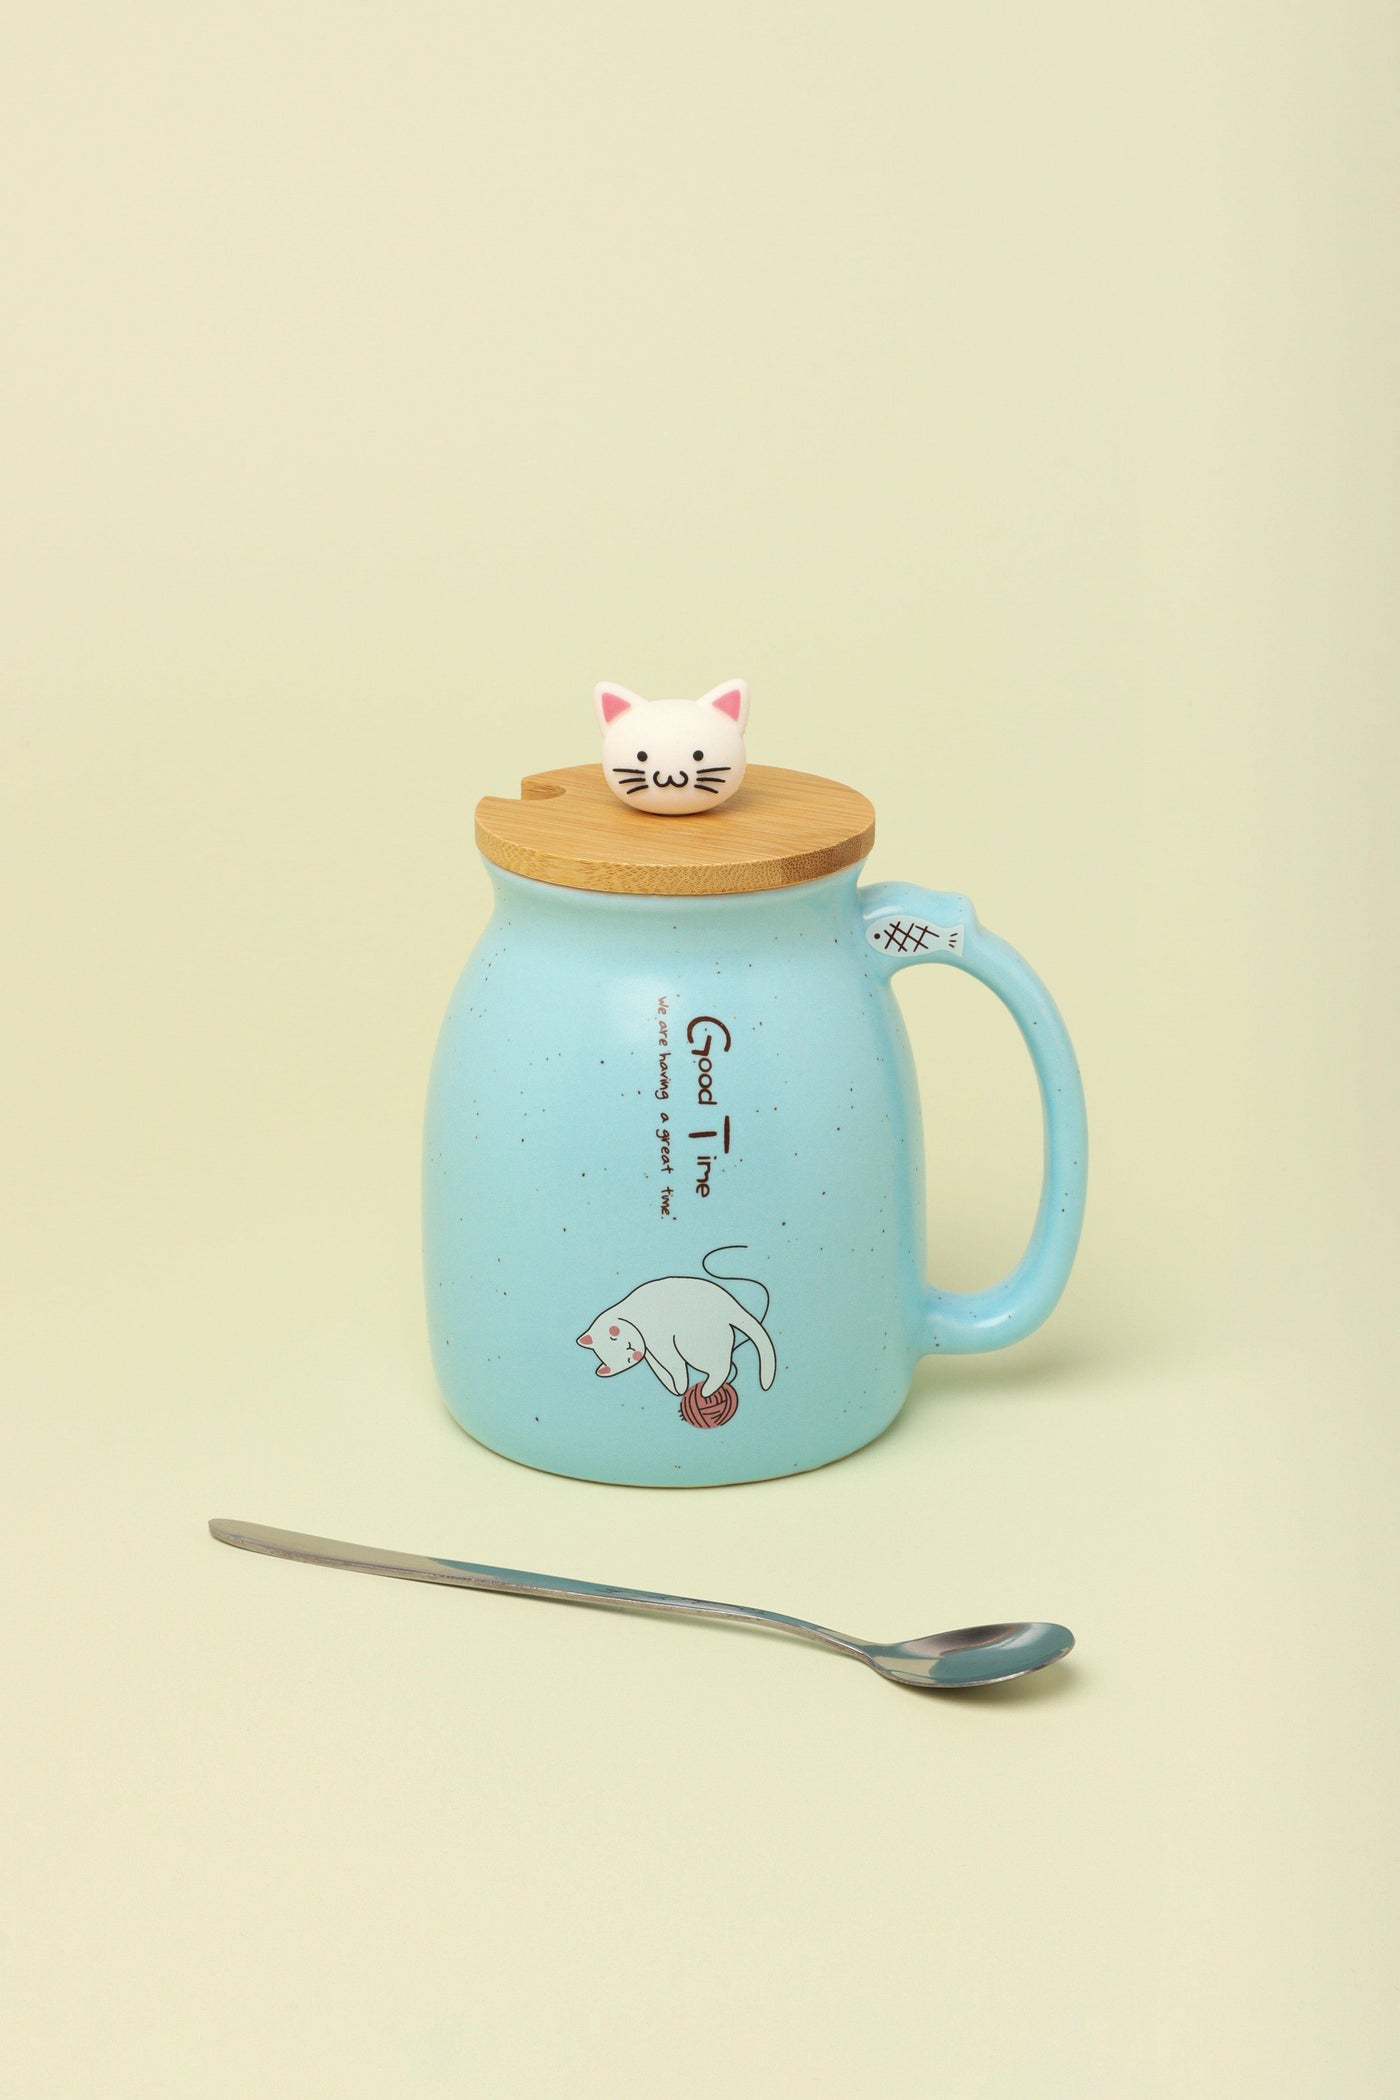 Gdecorstore Mugs and Cups Blue Cat Mugs Cute Pastel Ceramic Coffee Tea Cup with Lid And Spoon